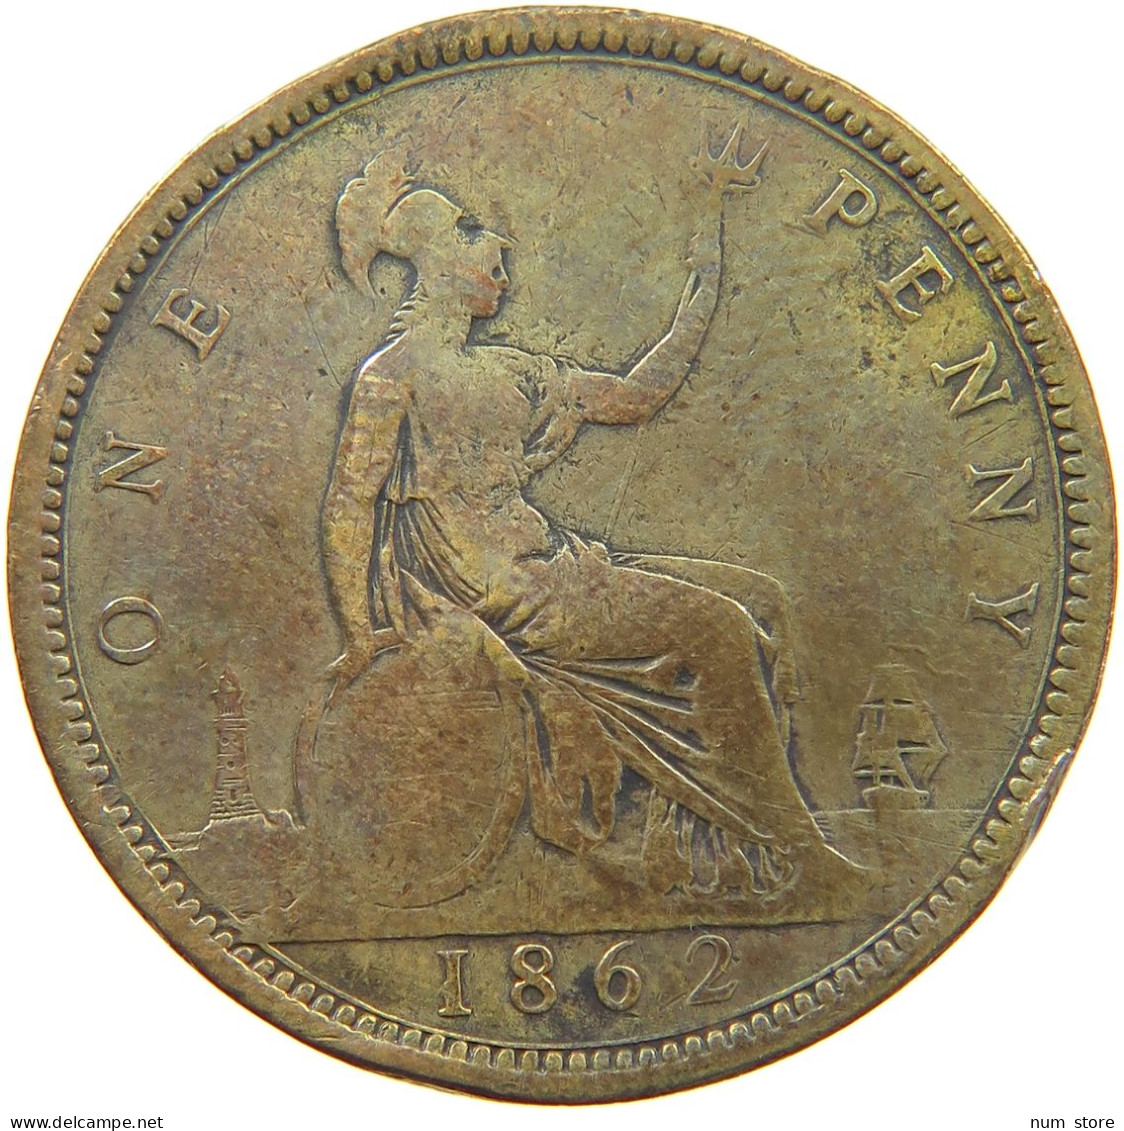 GREAT BRITAIN PENNY 1862 Victoria 1837-1901 #t140 0533 - D. 1 Penny